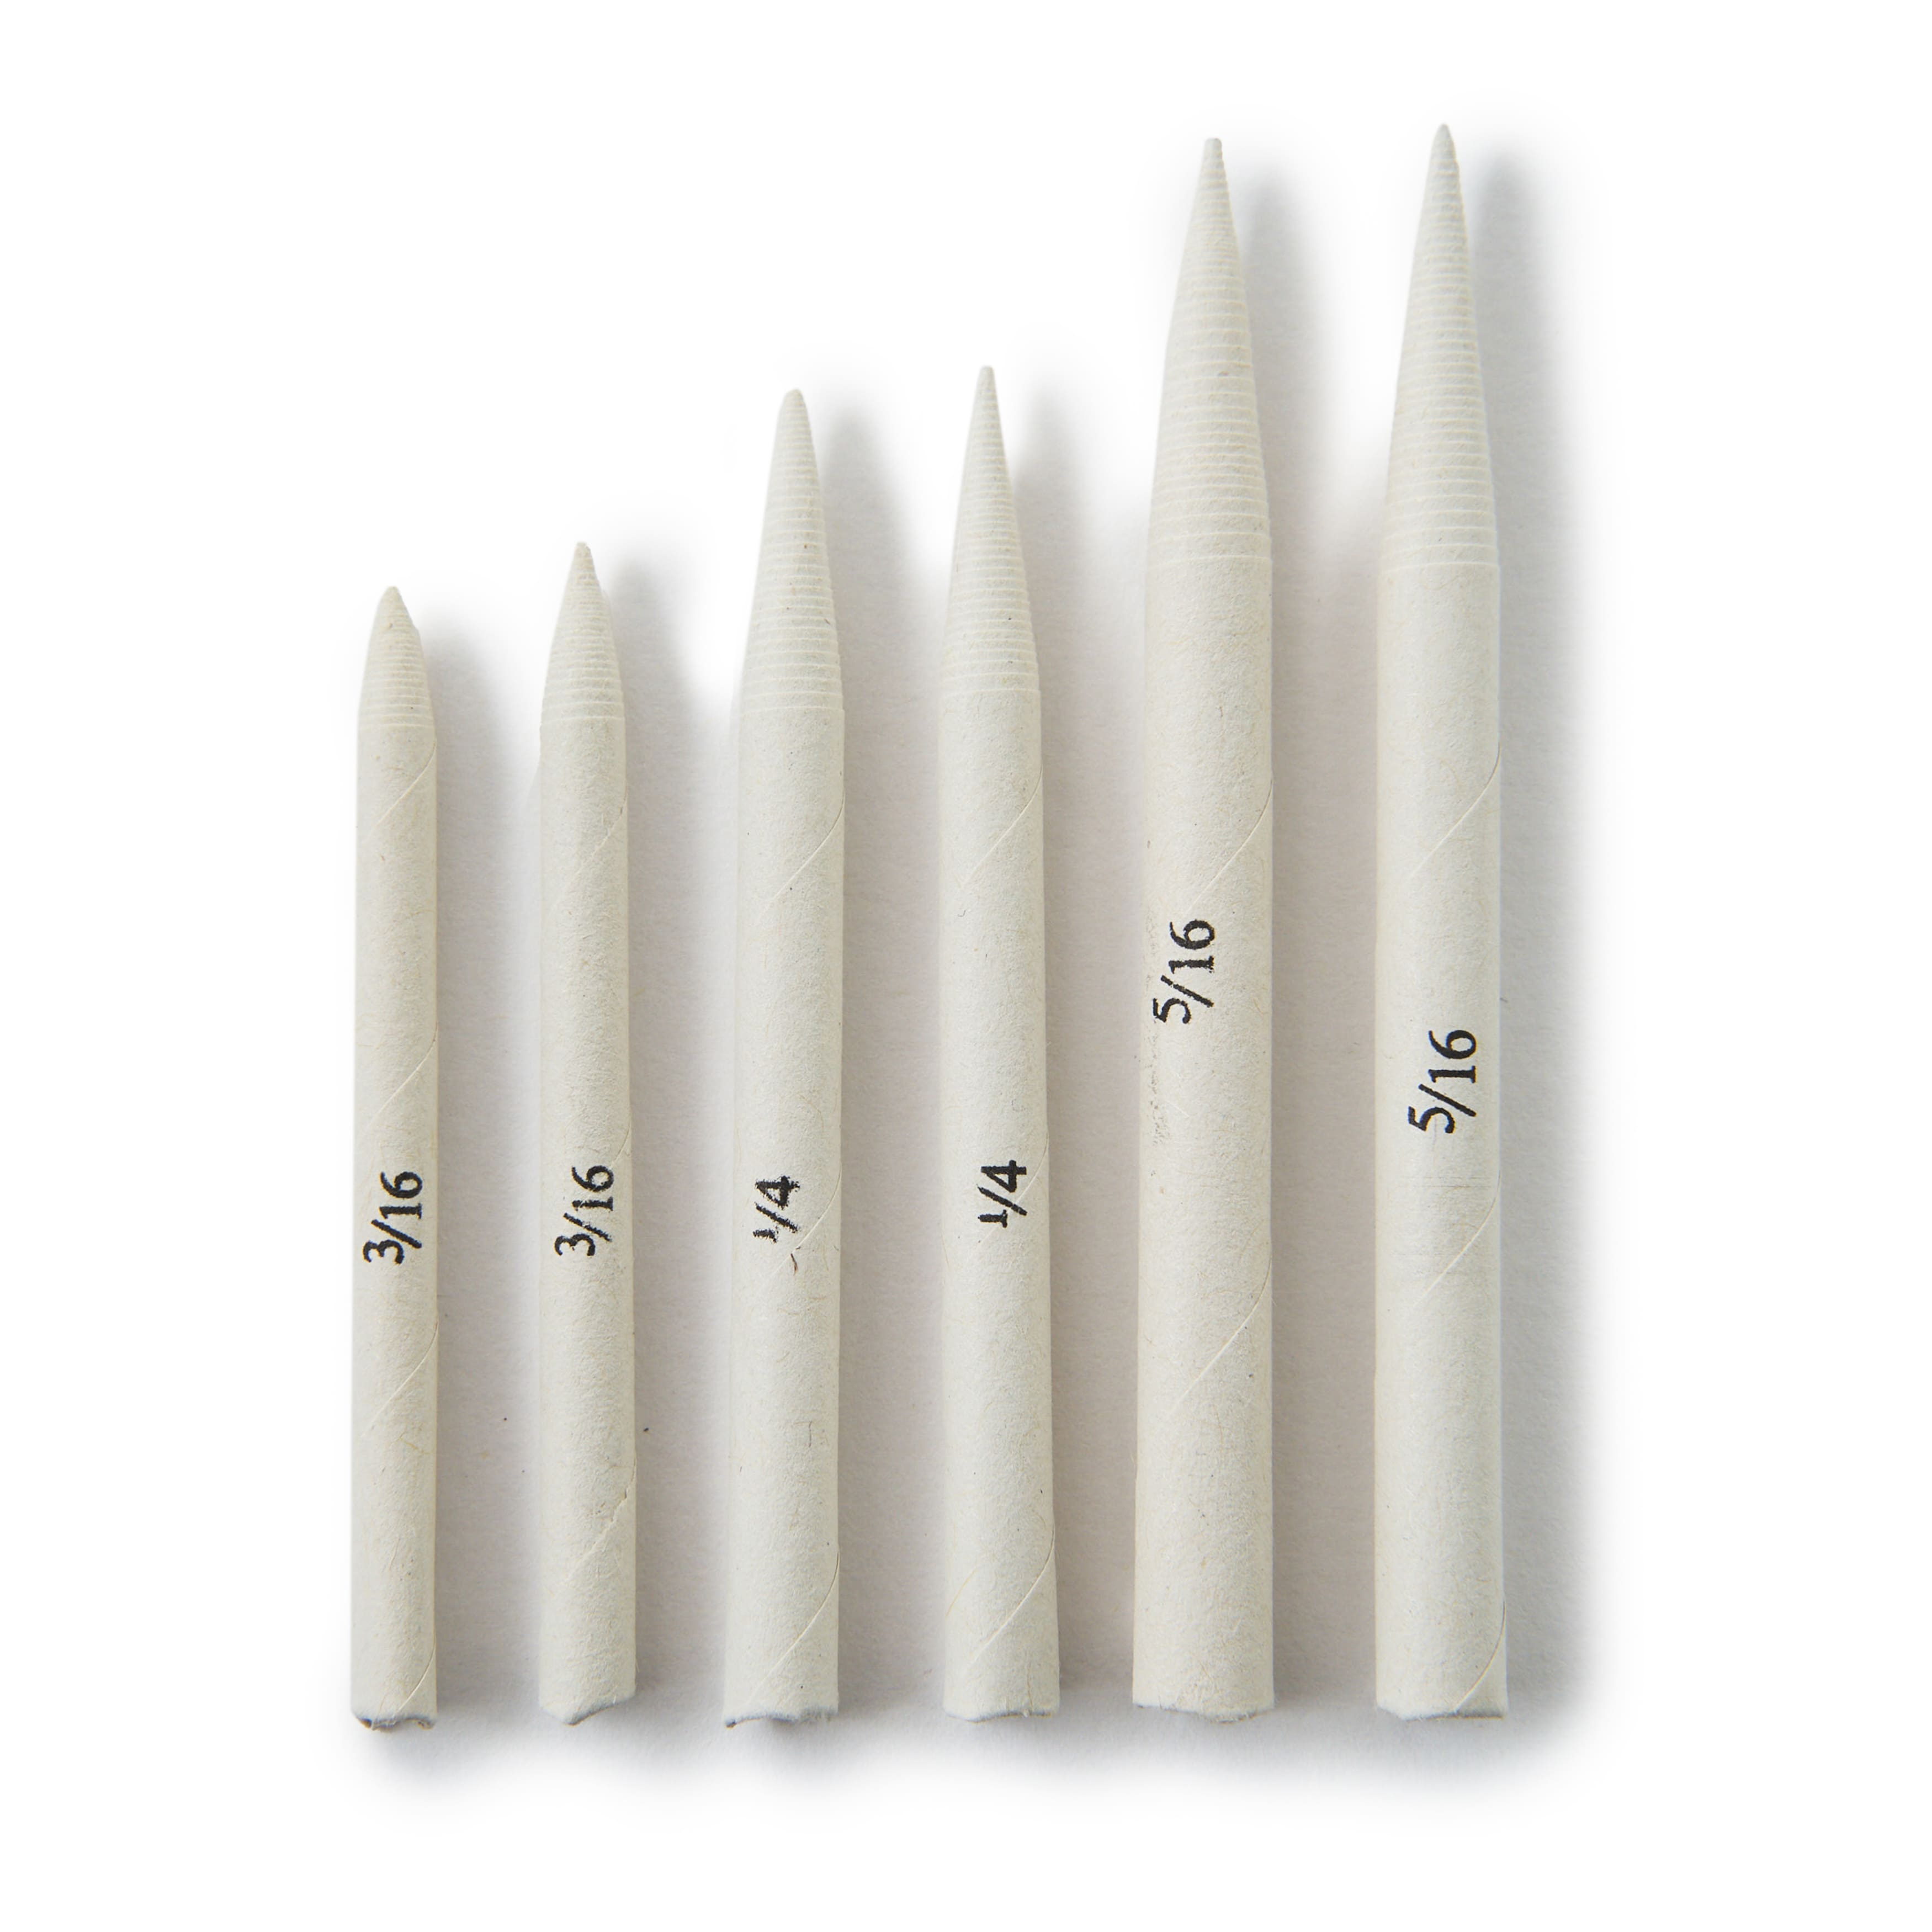  Ciieeo 12pcs Blender Tools Sketch Painting Tool Drawing  Accessories Artist Drawing Supply Artist Sketch shaders Smudge Erase Tool  Blending Pencil White Paper Student Art Supplies